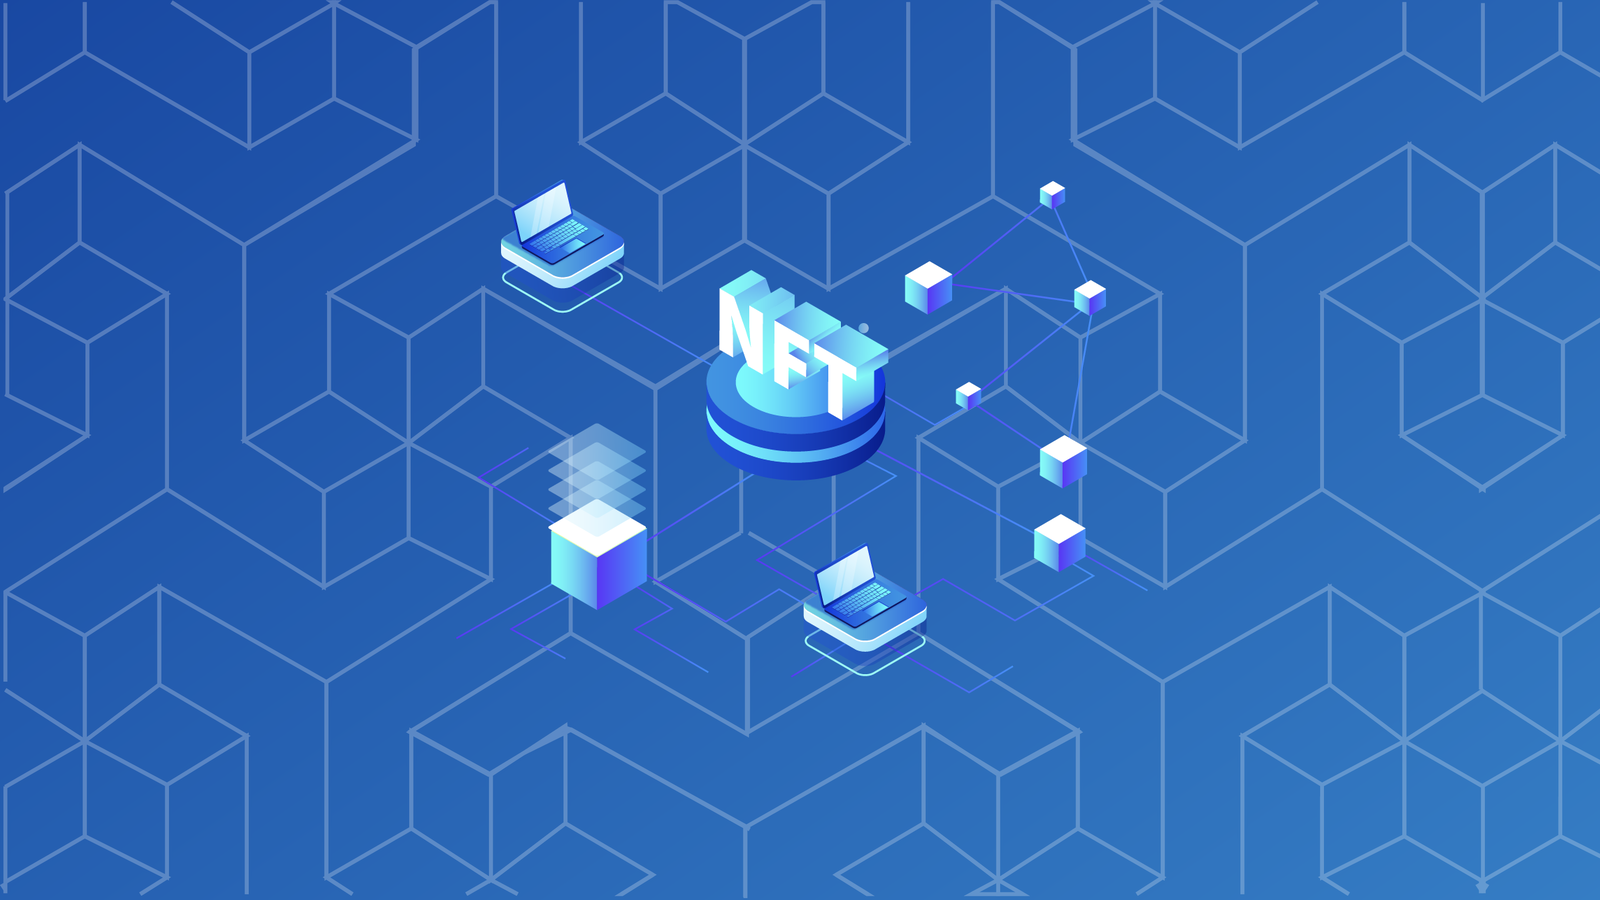 What Is Web3 and What Is Its Role in NFTs?